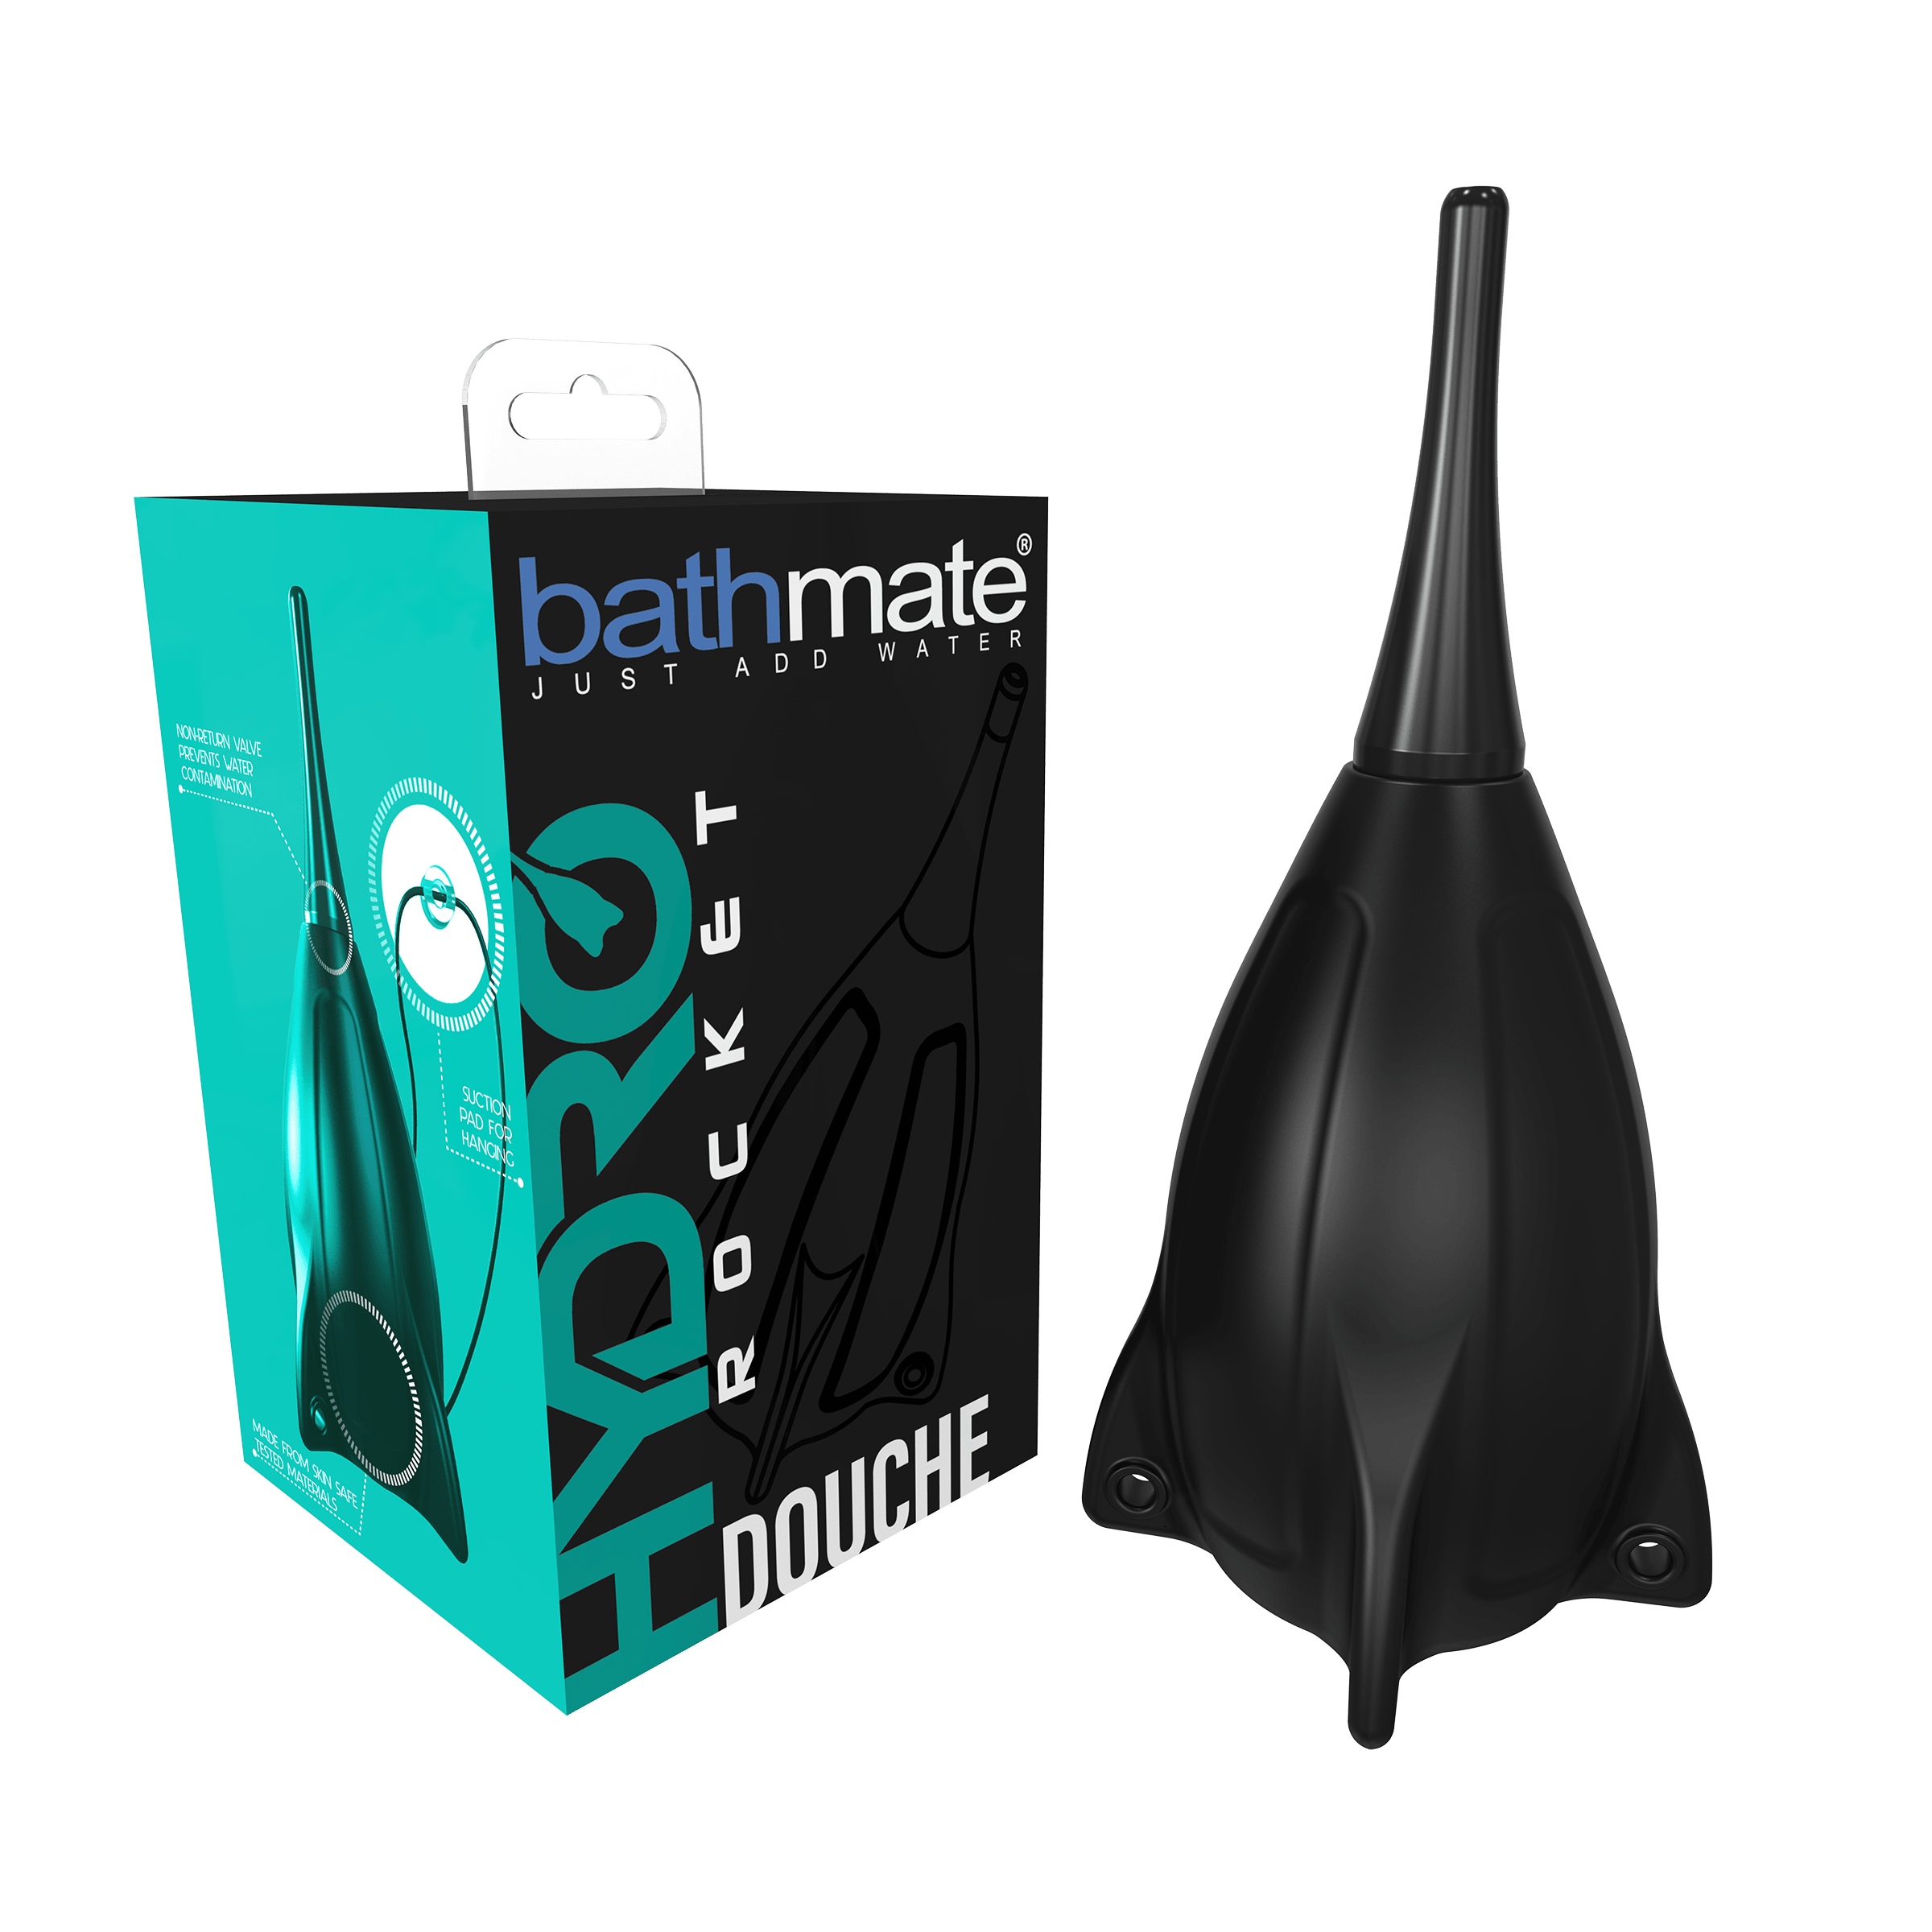 Hyro Rocket Douche by Bathmate, Official Retailer Since 2007